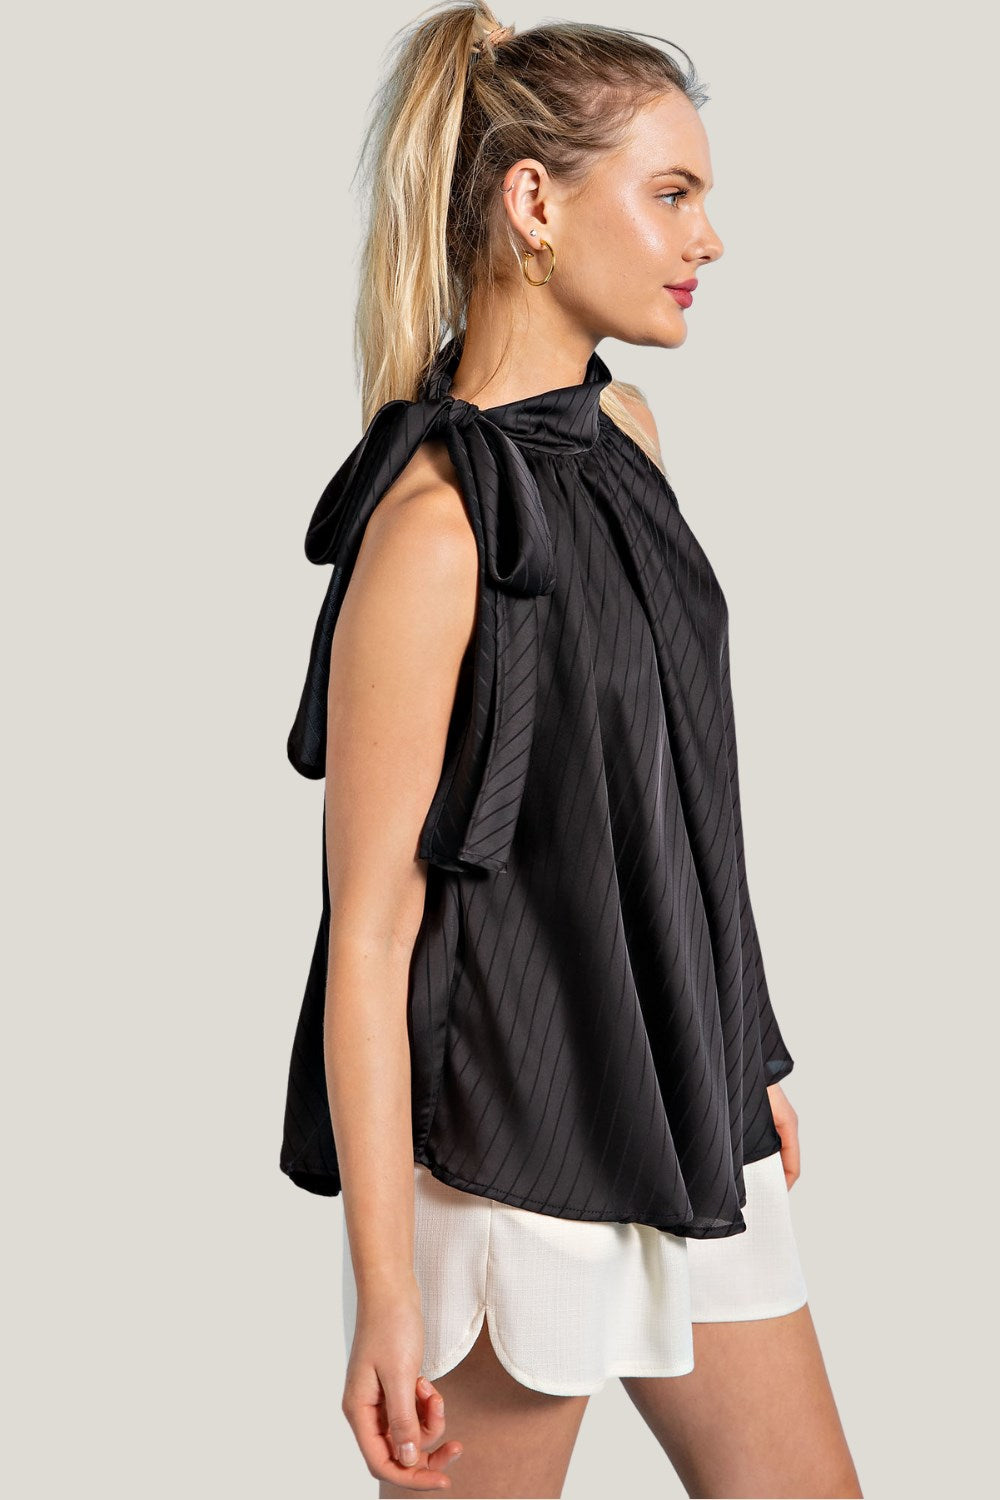 Charming Chiffon Tie Neck Blouse - Black-100 Sleeveless Tops-Glam-Coastal Bloom Boutique, find the trendiest versions of the popular styles and looks Located in Indialantic, FL